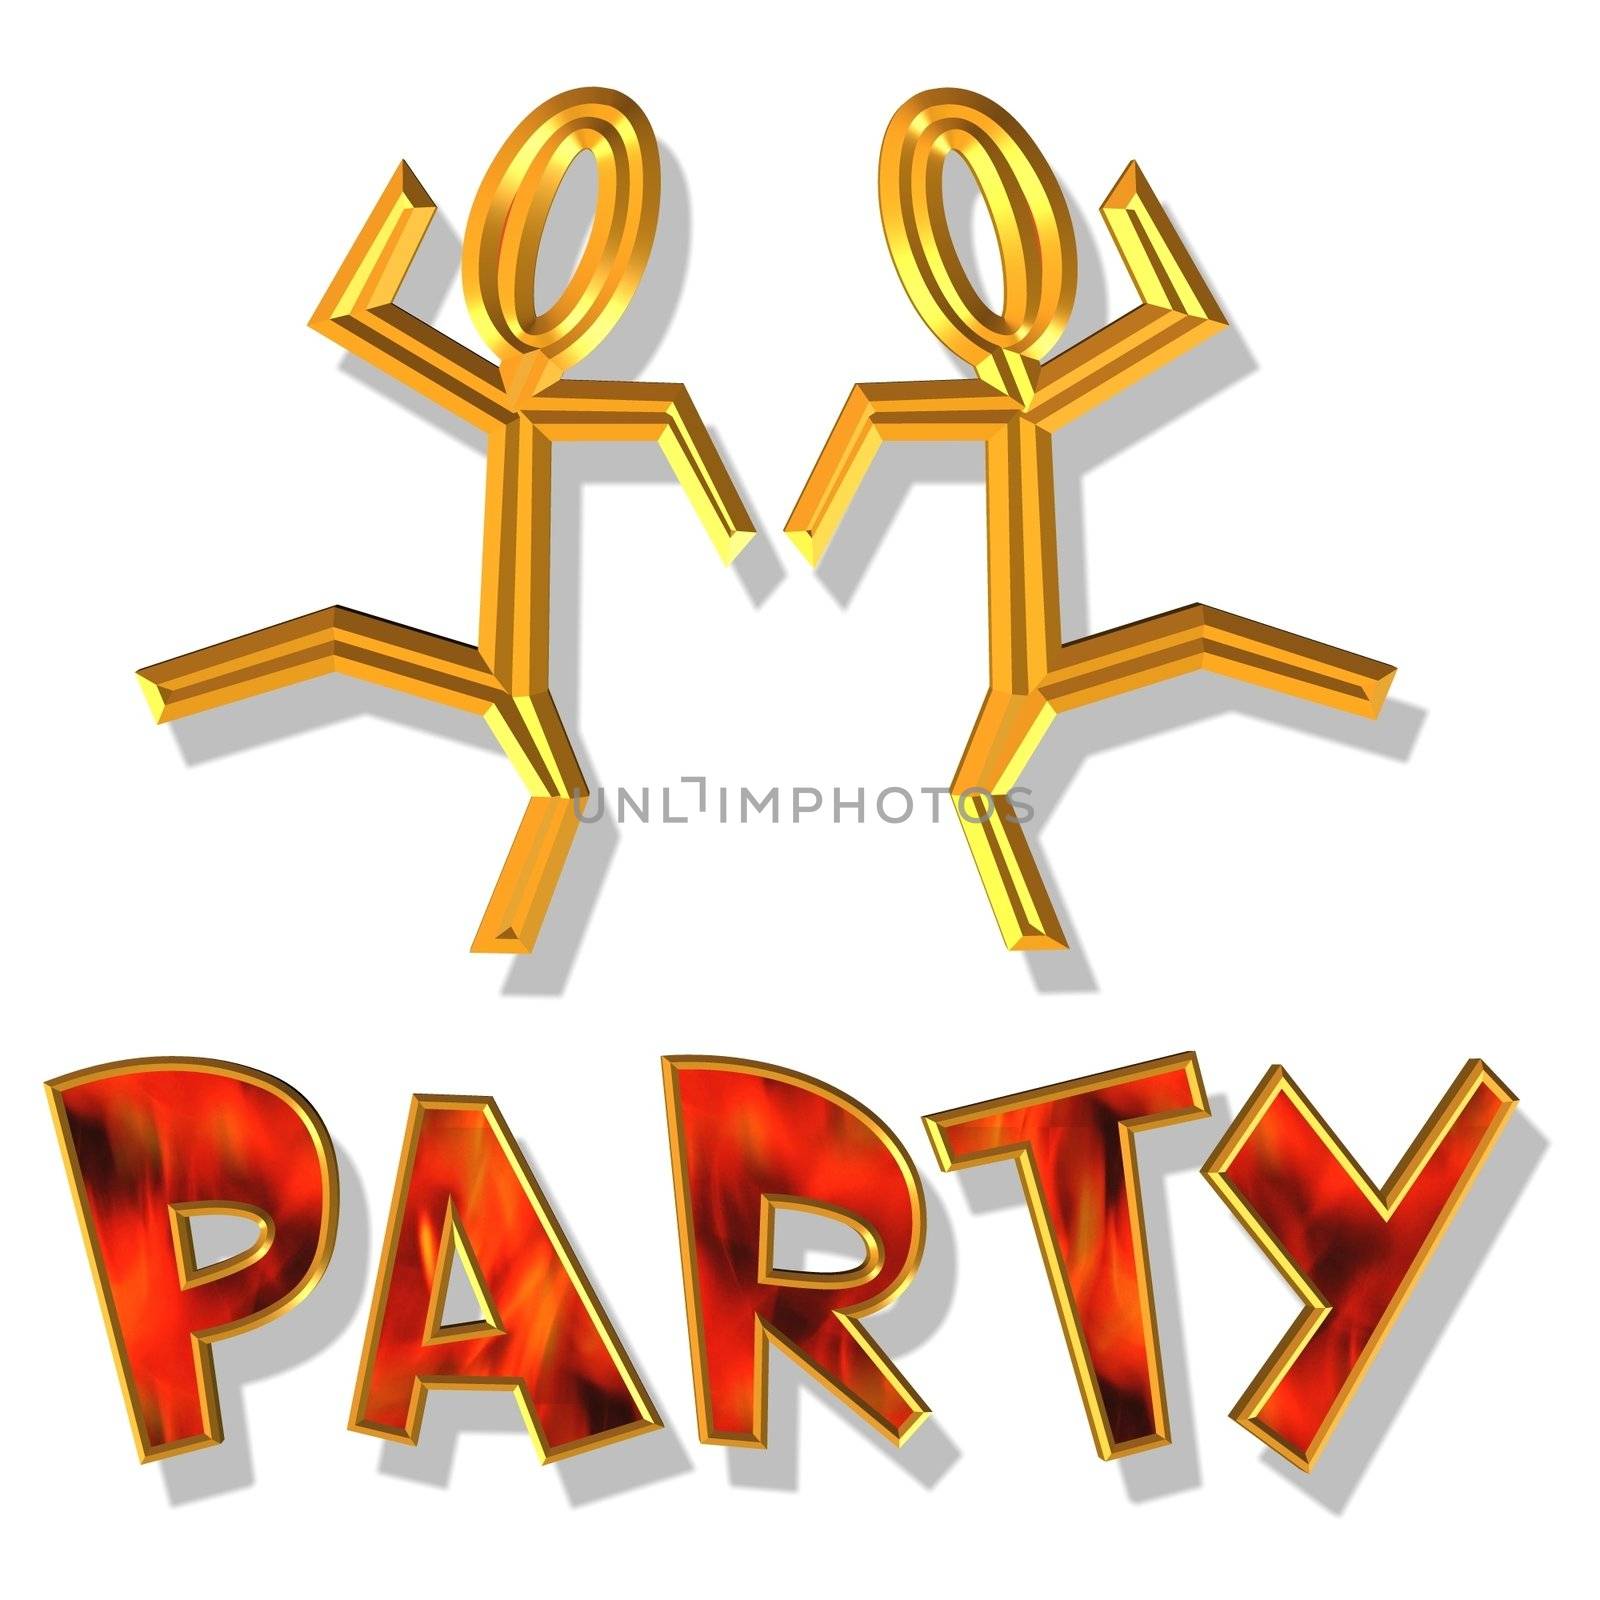 an illustration to announce a party time